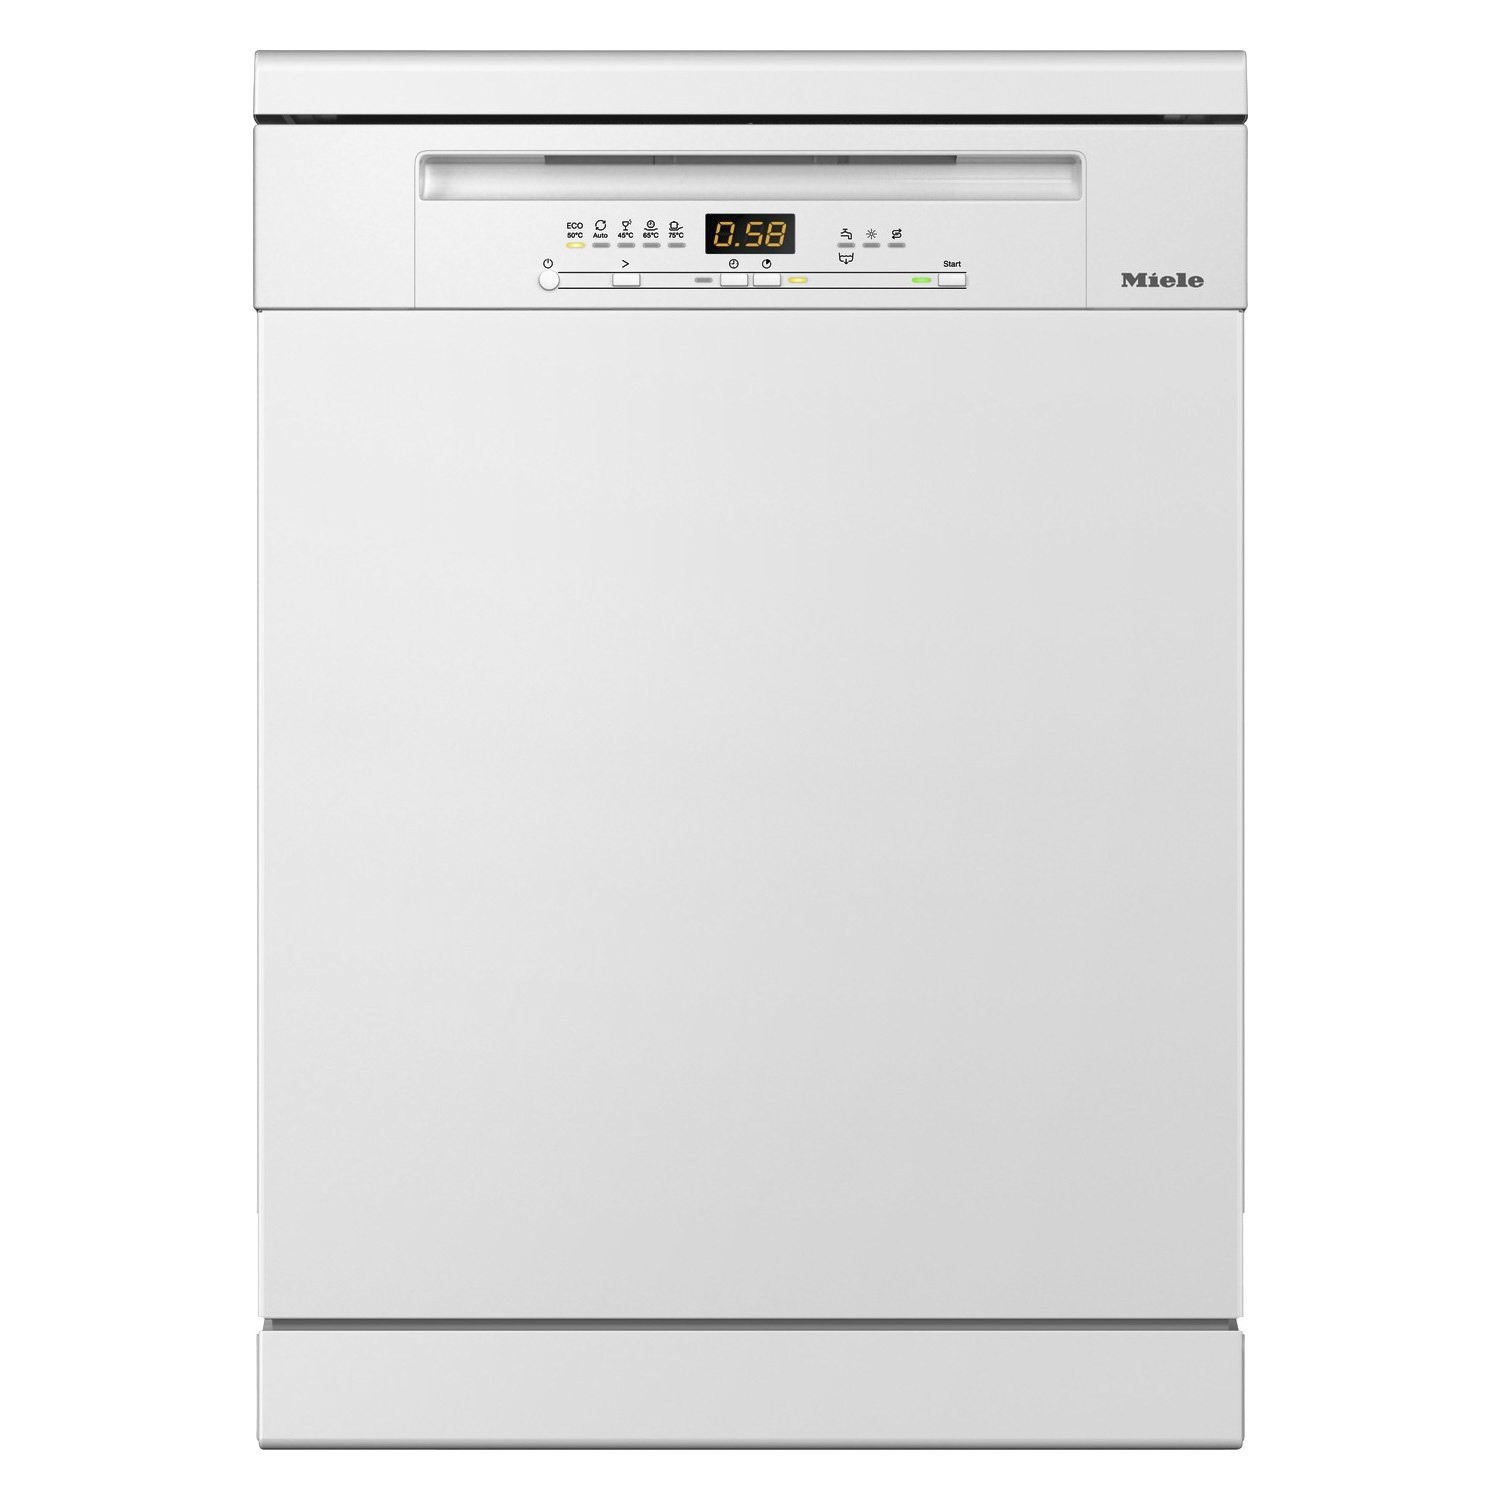 Refurbished Miele G5200-Series G5222SCWH 14 Place Freestanding Dishwasher White